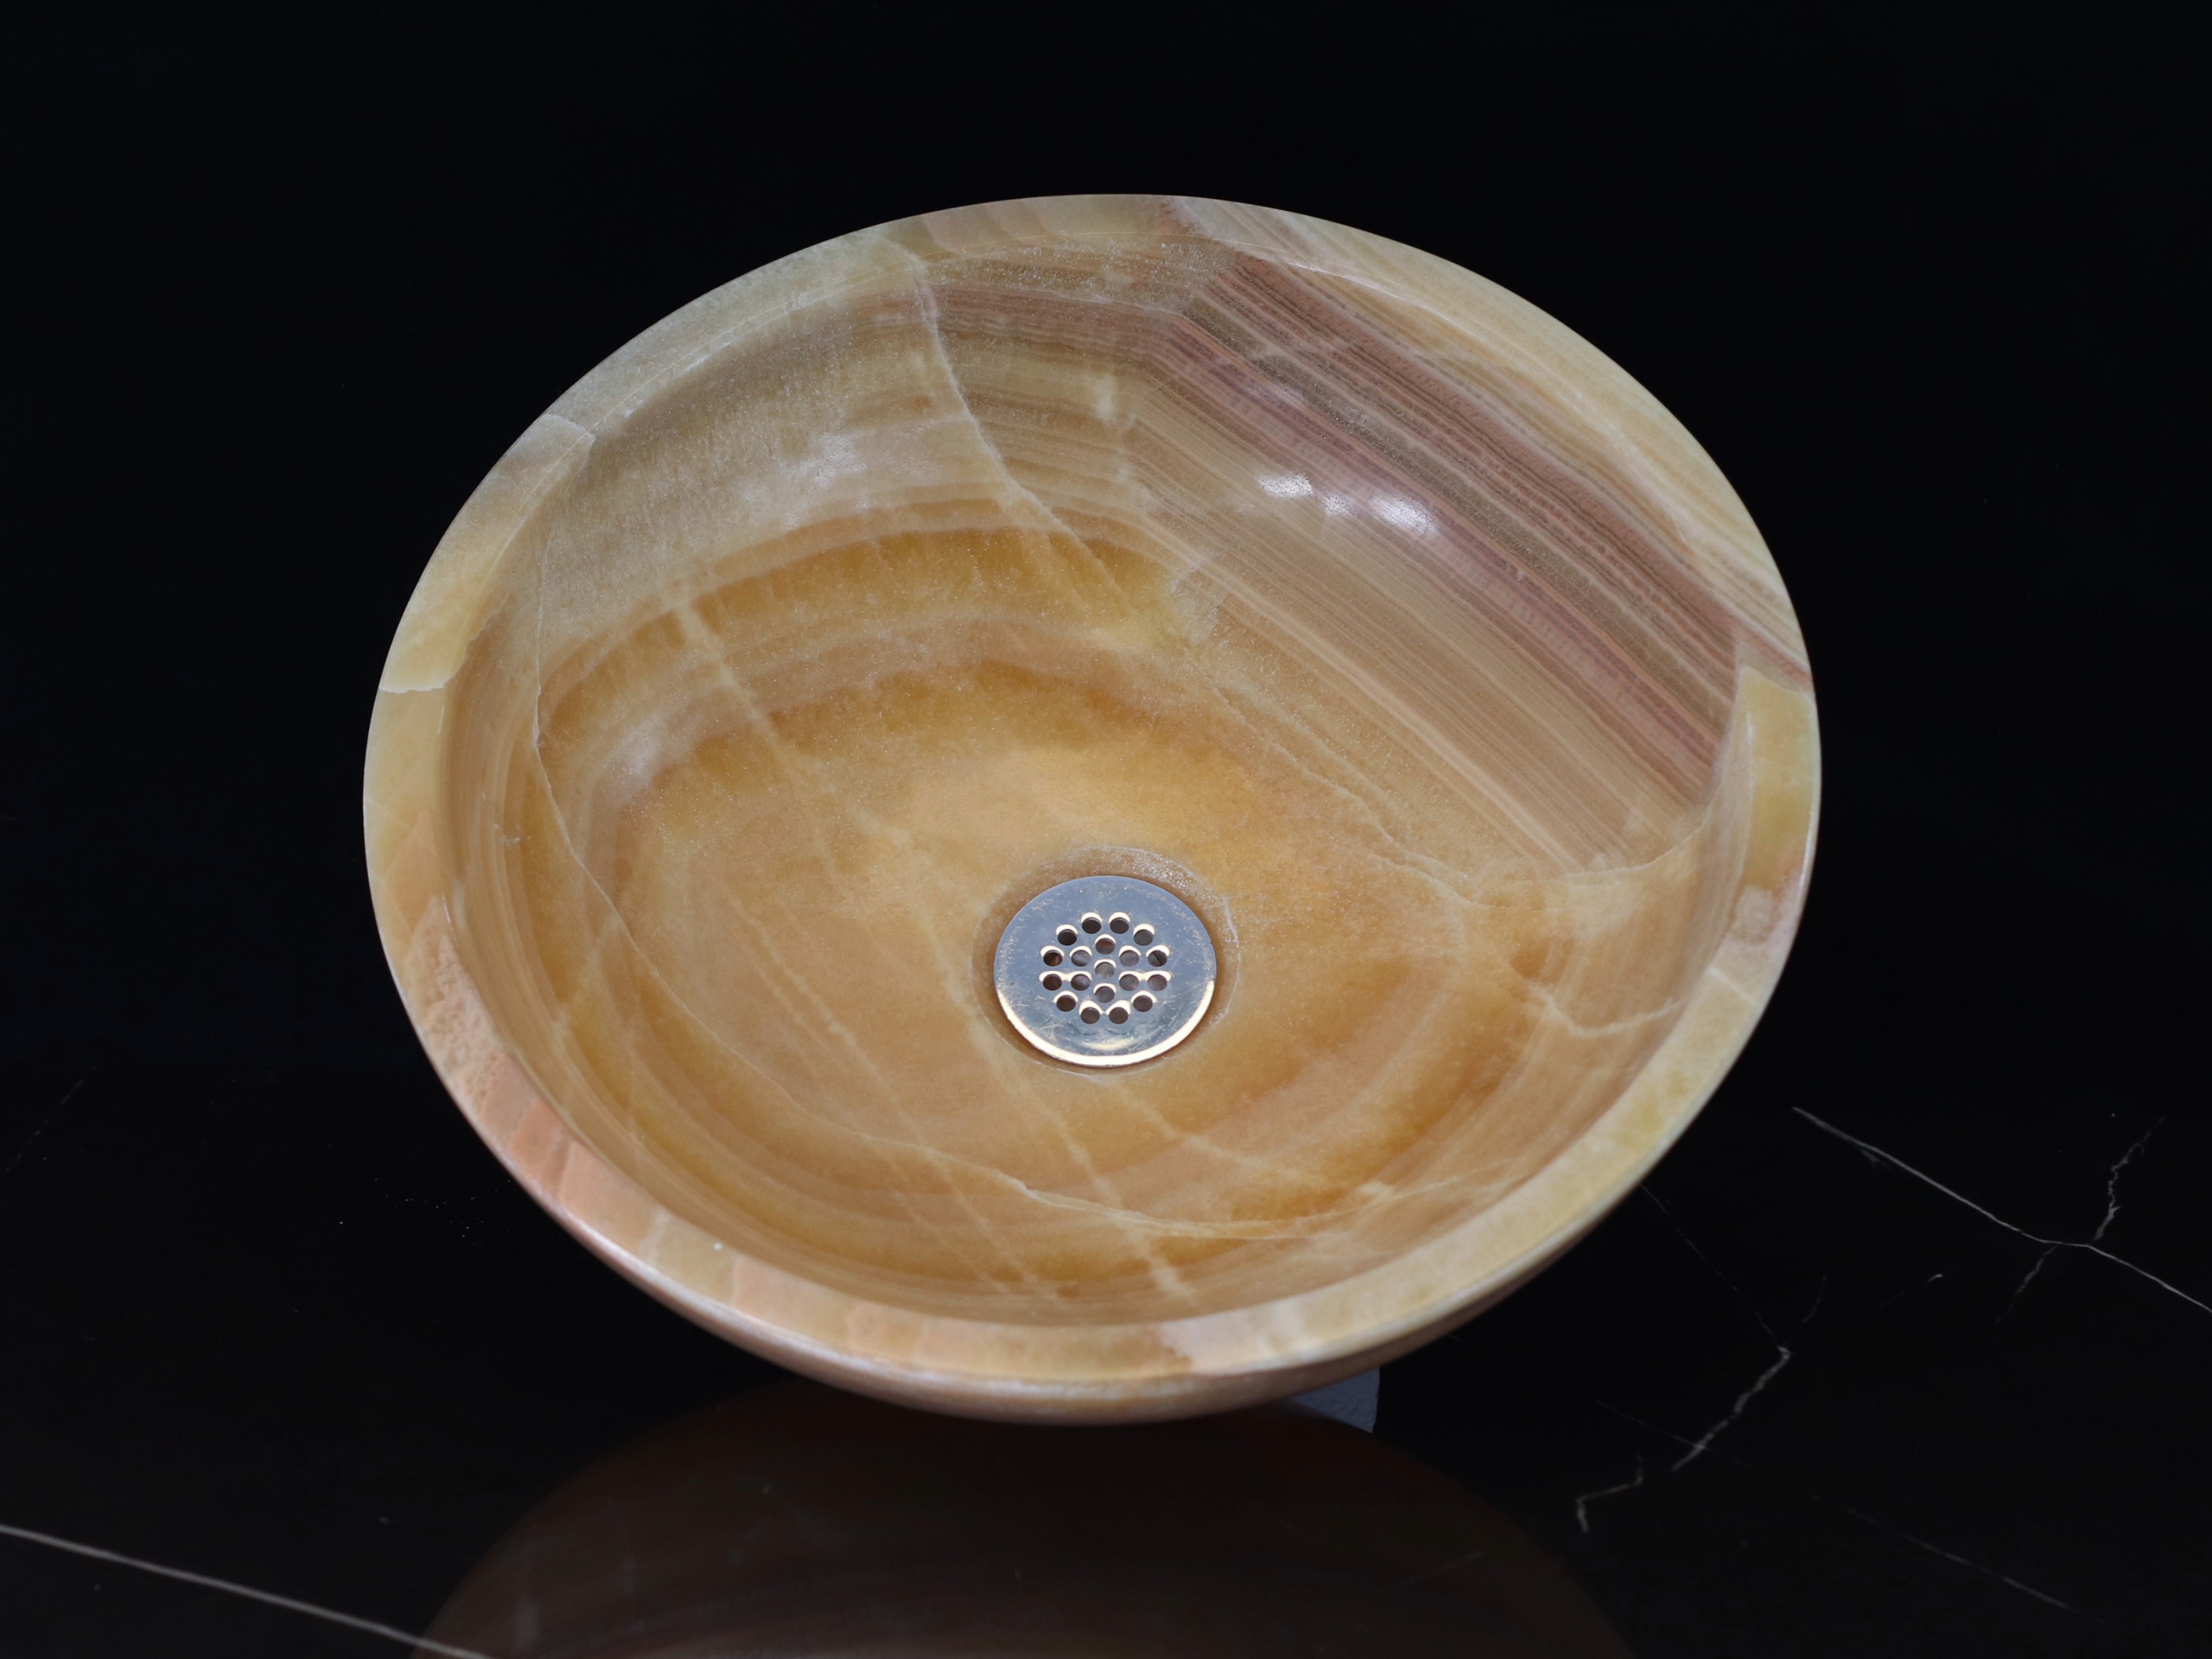 Brown and Tan Round Onyx Stone Vessel Sink. This sink is made to sit above the counter. It has a polished finish. Handmade in Mexico. We hand finish, package, and ship from the USA. Buy now at www.felipeandgrace.com. 